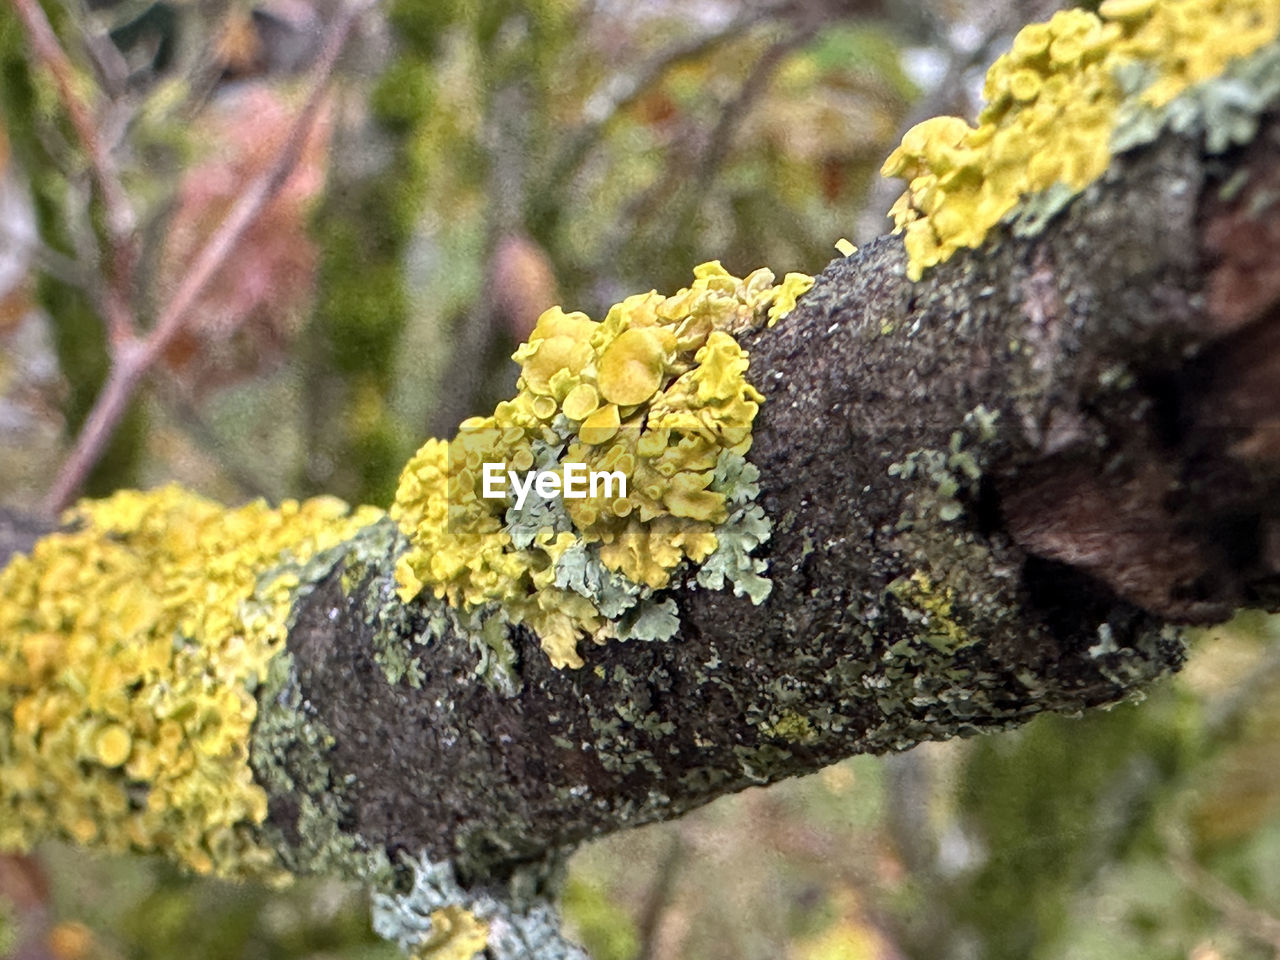 tree, yellow, plant, lichen, nature, close-up, flower, focus on foreground, day, leaf, no people, growth, moss, tree trunk, trunk, macro photography, outdoors, beauty in nature, branch, selective focus, textured, fungus, green, autumn, produce, shrub, wildlife